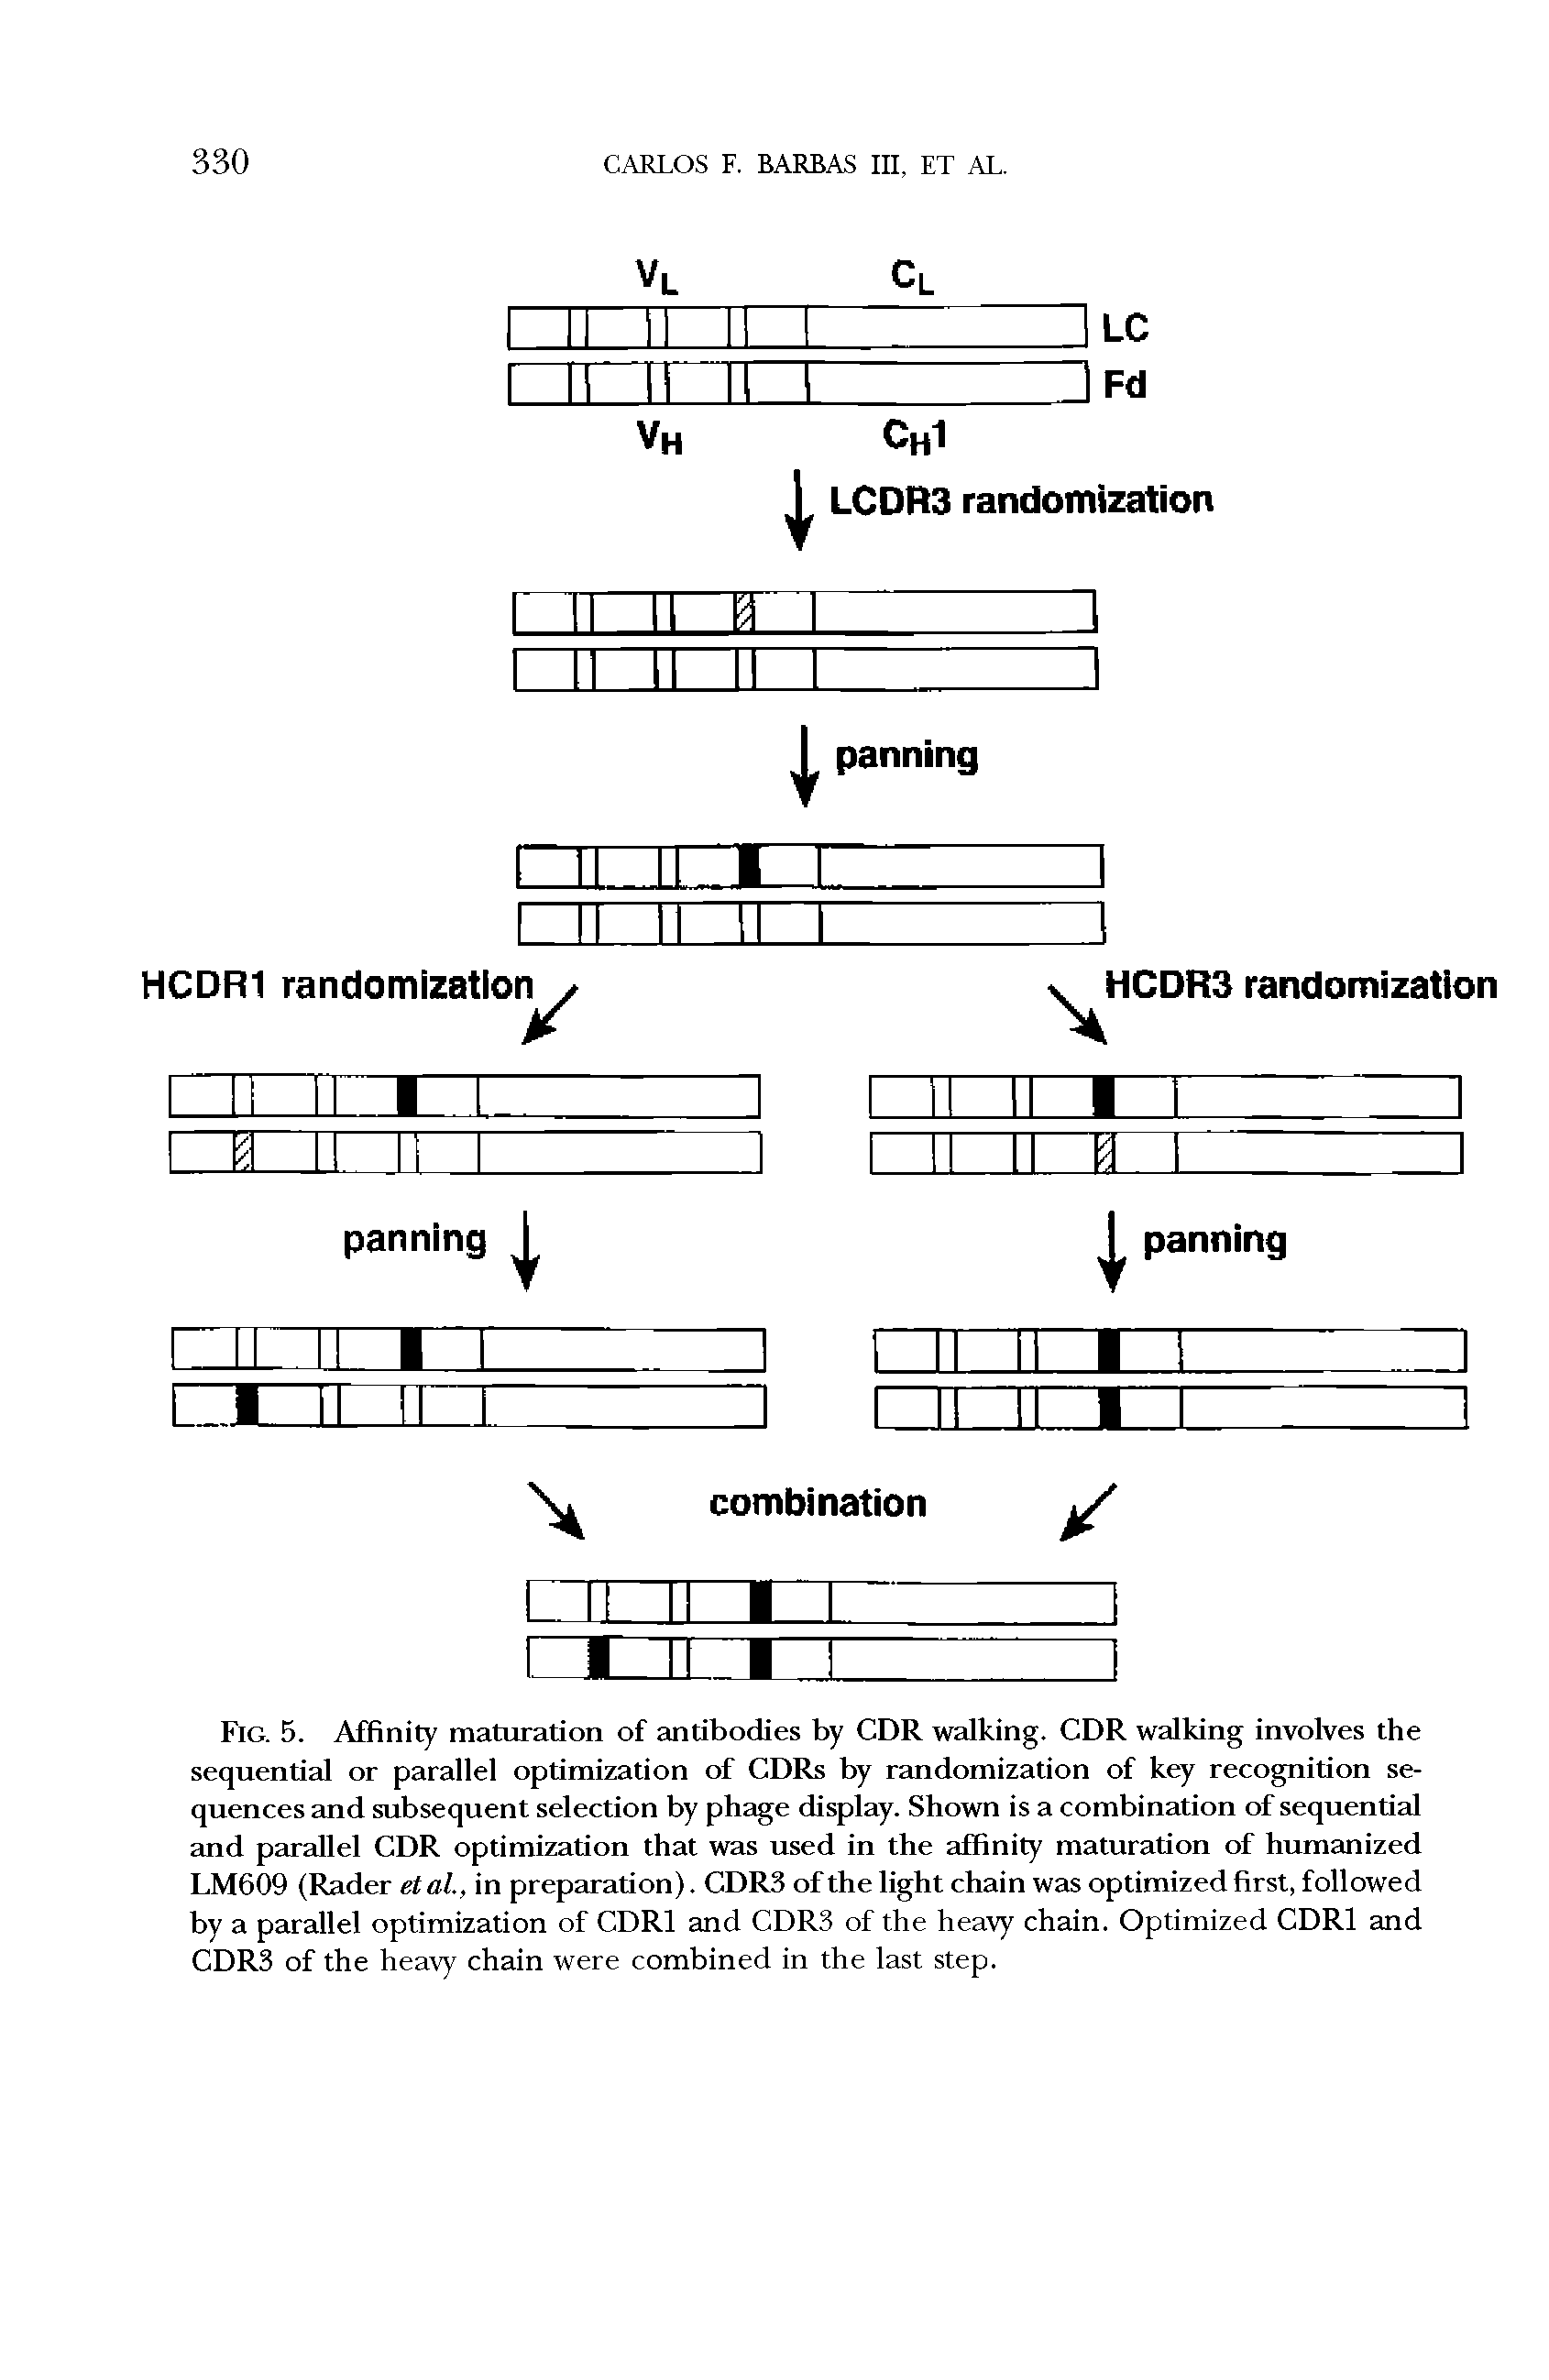 Fig. 5. Affinity maturation of antibodies by CDR walking. CDR walking involves the sequential or parallel optimization of CDRs by randomization of key recognition sequences and subsequent selection by phage display. Shown is a combination of sequential and parallel CDR optimization that was used in the affinity maturation of humanized LM609 (Rader et al, in preparation). CDR3 of the light chain was optimized first, followed by a parallel optimization of CDR1 and CDR3 of the heavy chain. Optimized CDR1 and CDR3 of the heavy chain were combined in the last step.